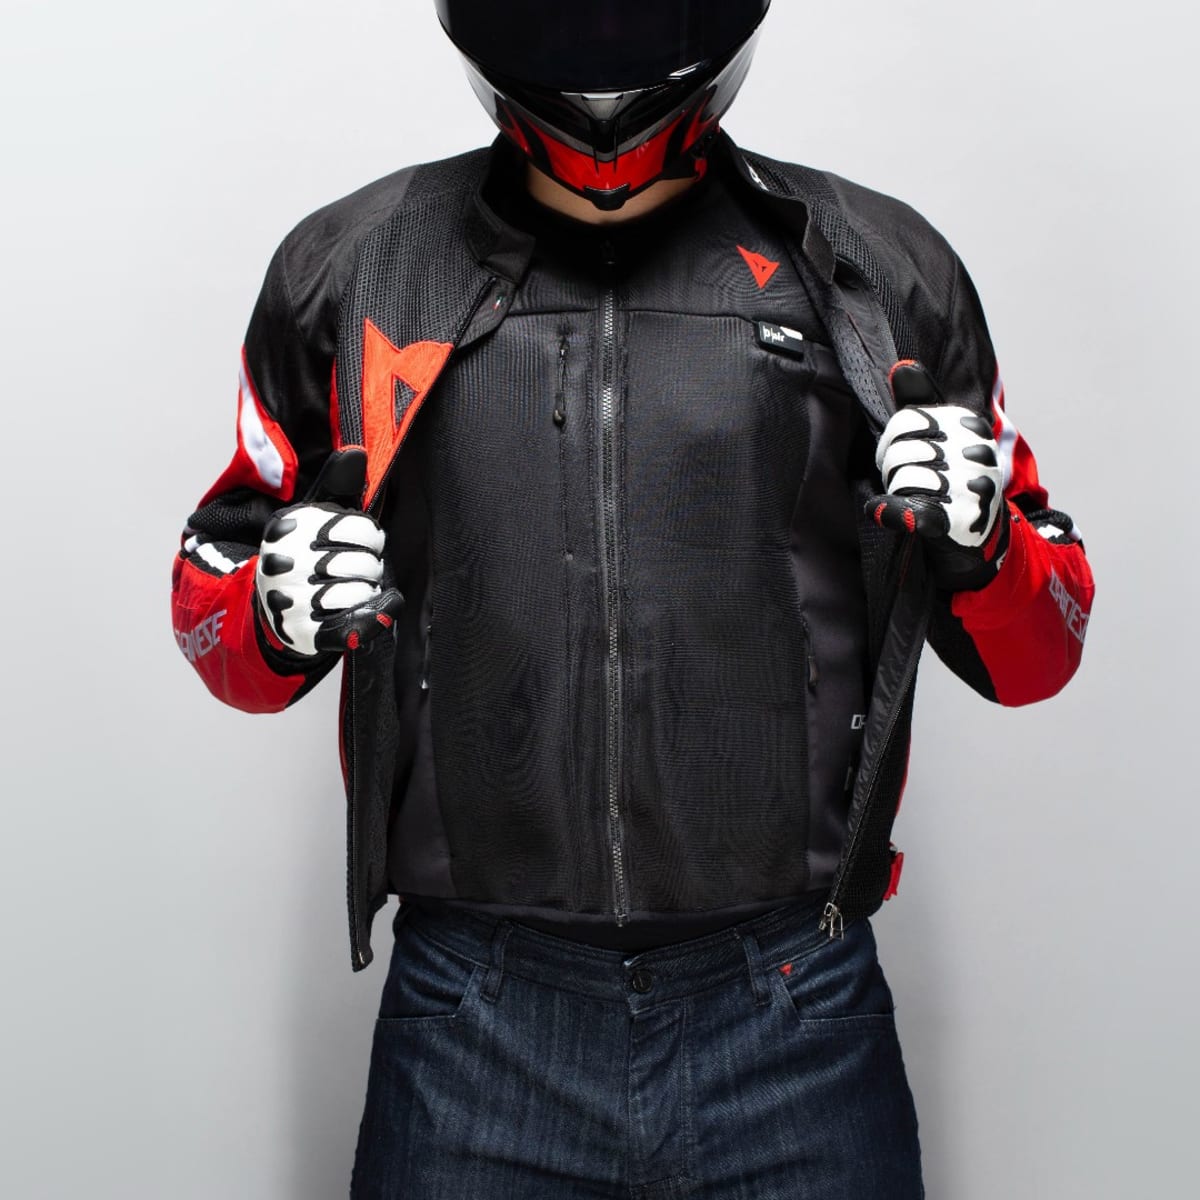 NEW Motorcycle Air-bag Vest Moto Racing Professional Advanced Air Bag  System Motocross Protective Airbag Airbag Jacket